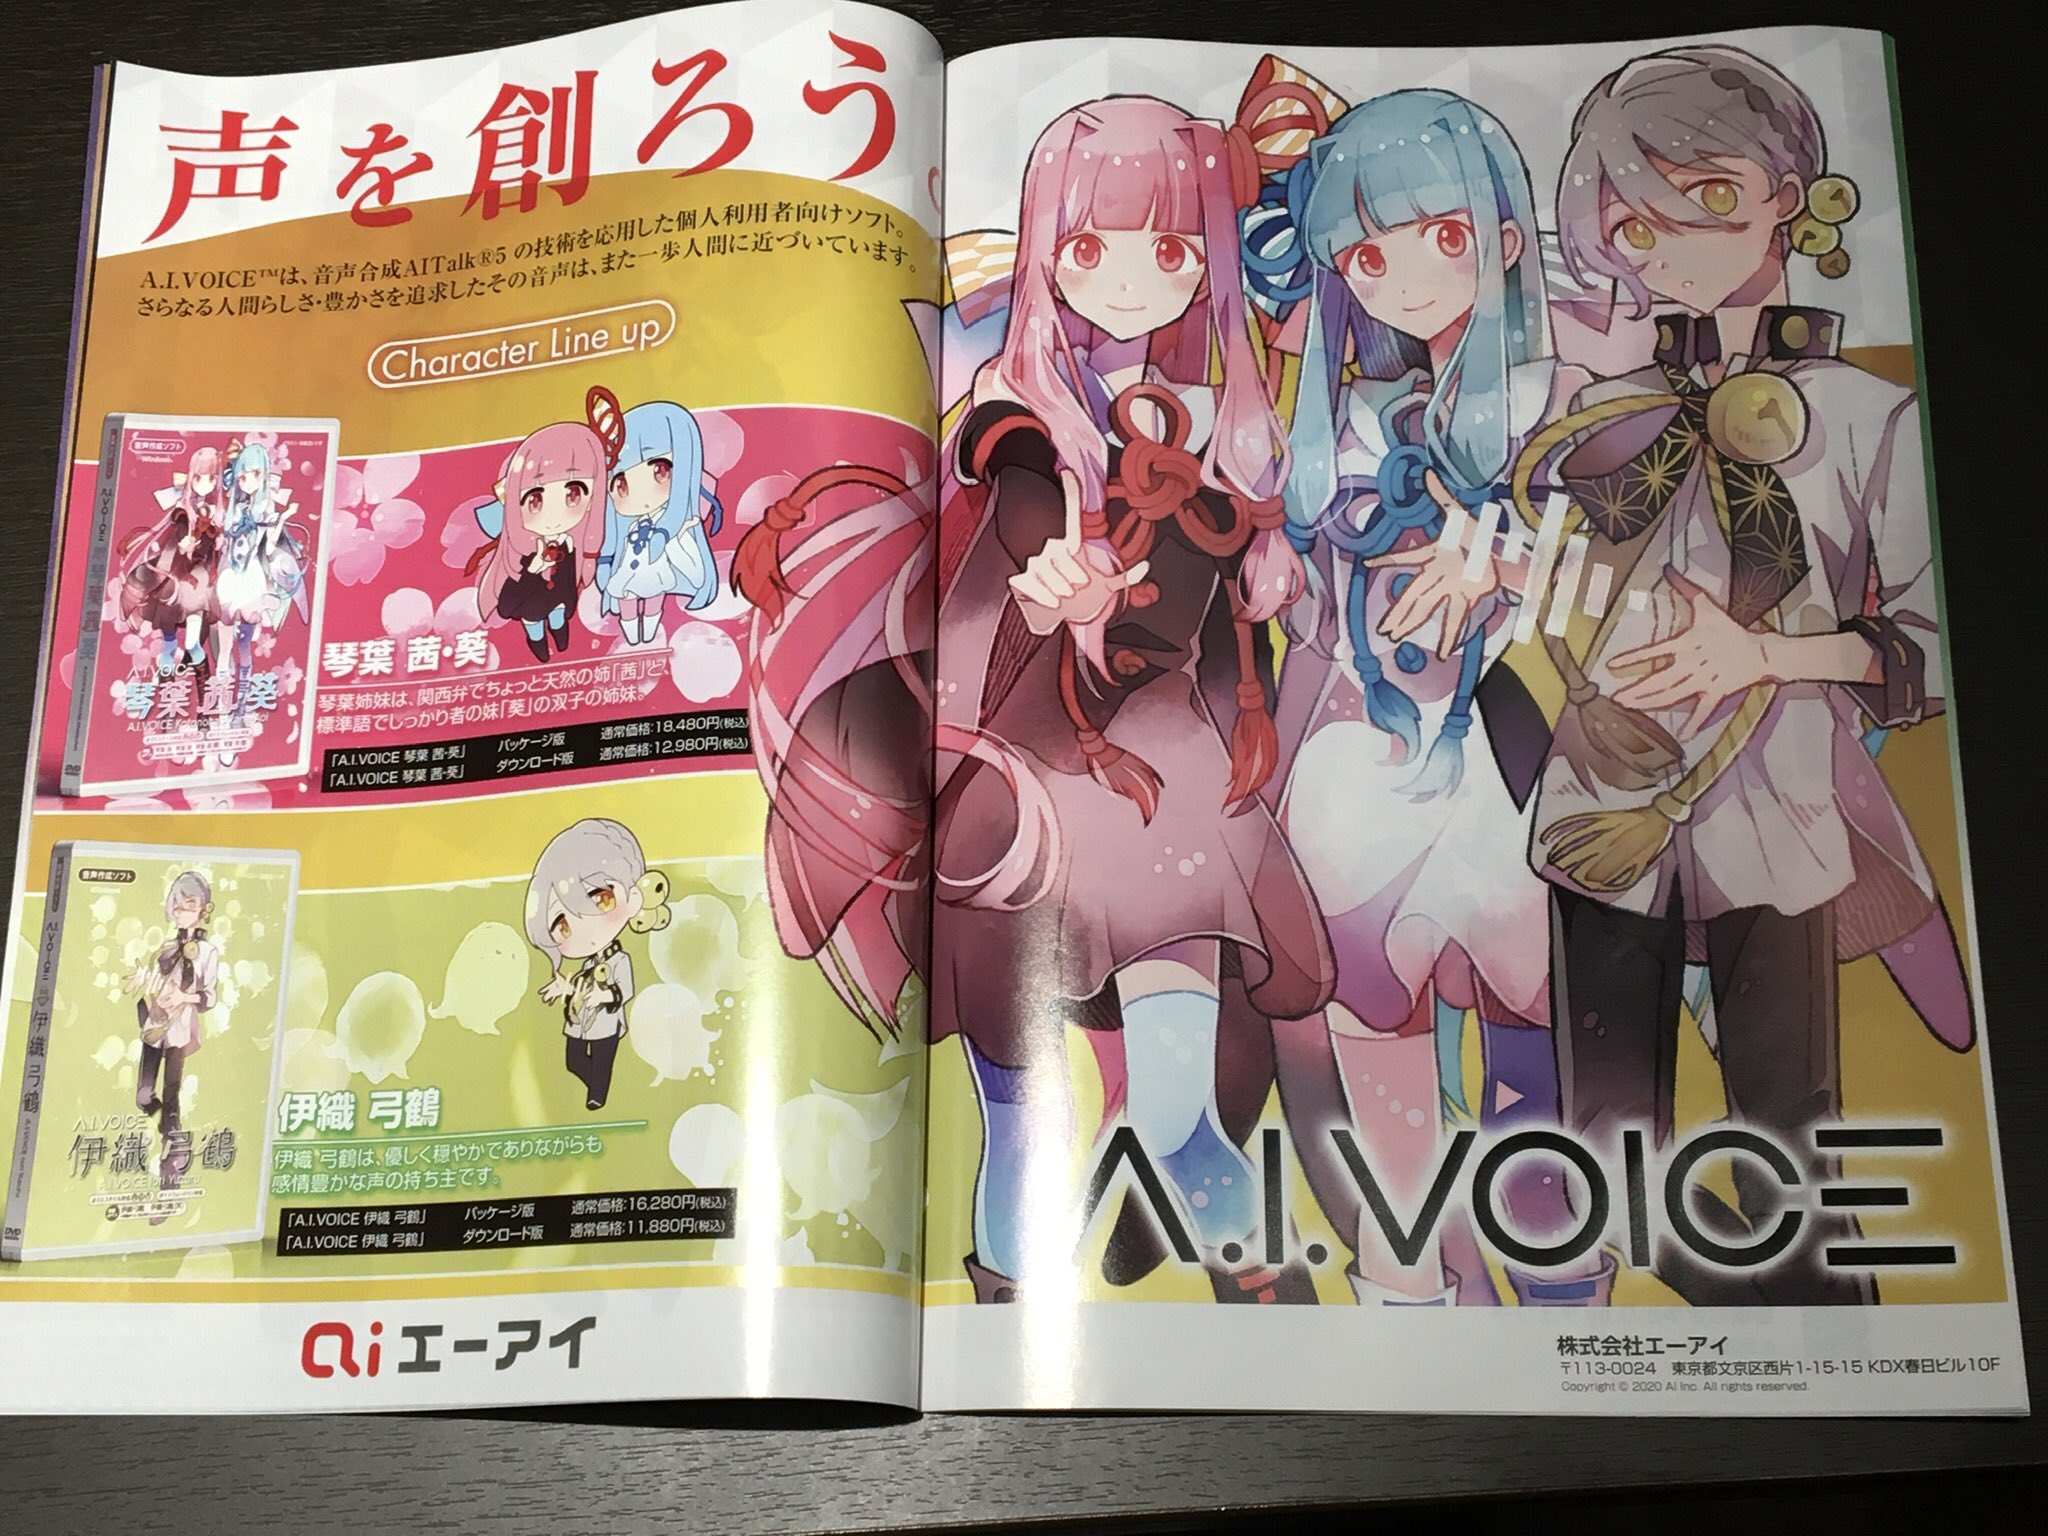 Vocasphere Vocalomakets Was Also Present At Sousaku Summit With A Beautiful And Completely Free Brochure Introducing Their Characters Yuzukiyukari Amp Kizunaakari And More ソウサミ 結月ゆかり 紲星あかり Vocaloid Voidol